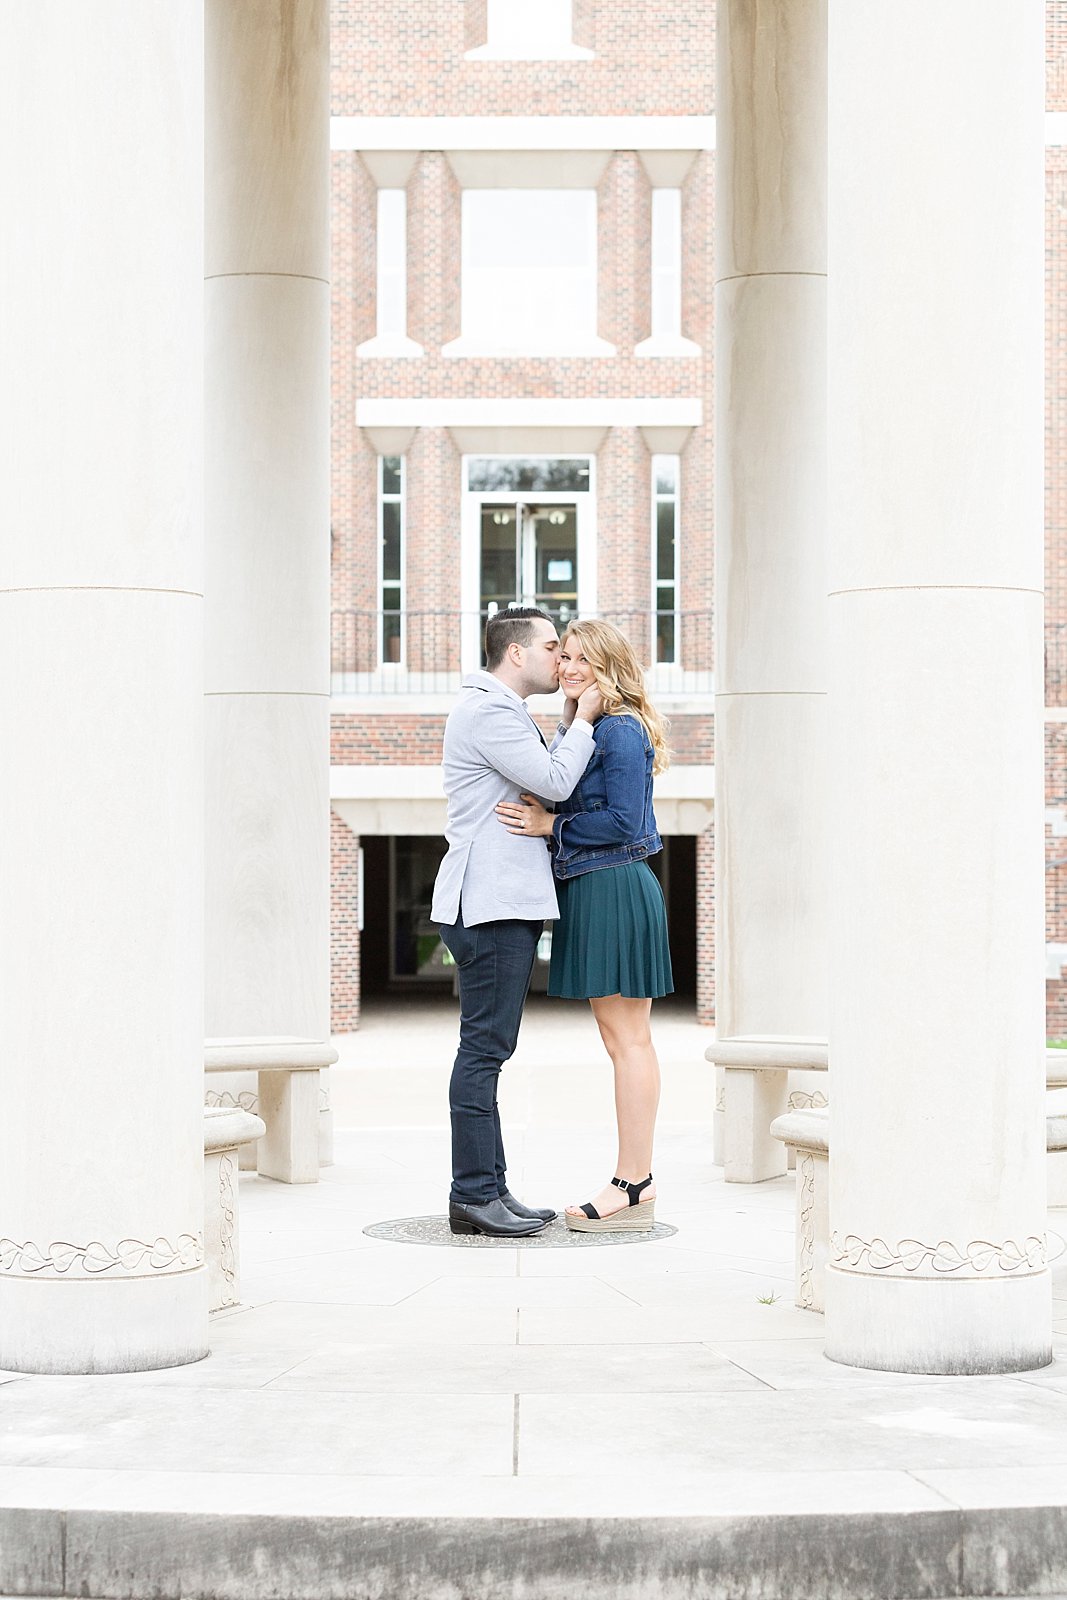 engagement session in Dallas TX with Dallas TX wedding photographer Randi Michelle Photography